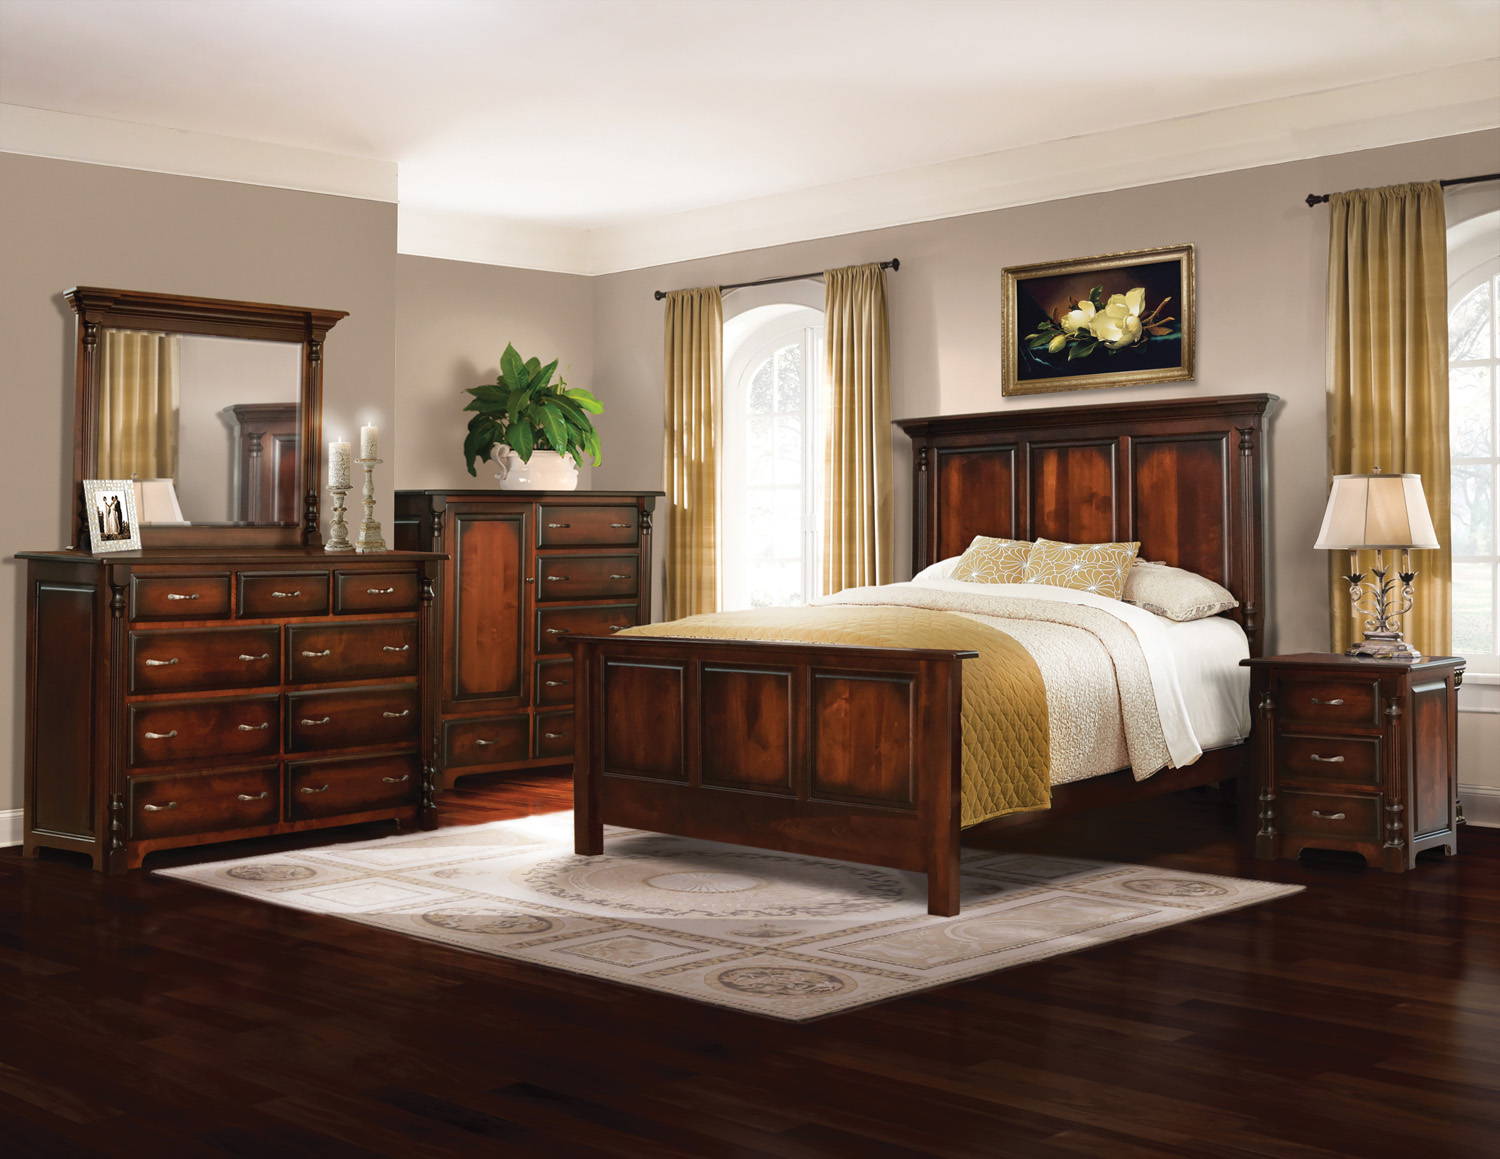 Image of fully customizable Ashley Bedroom Set through Harvest Home Interiors Amish Solid Wood Furniture